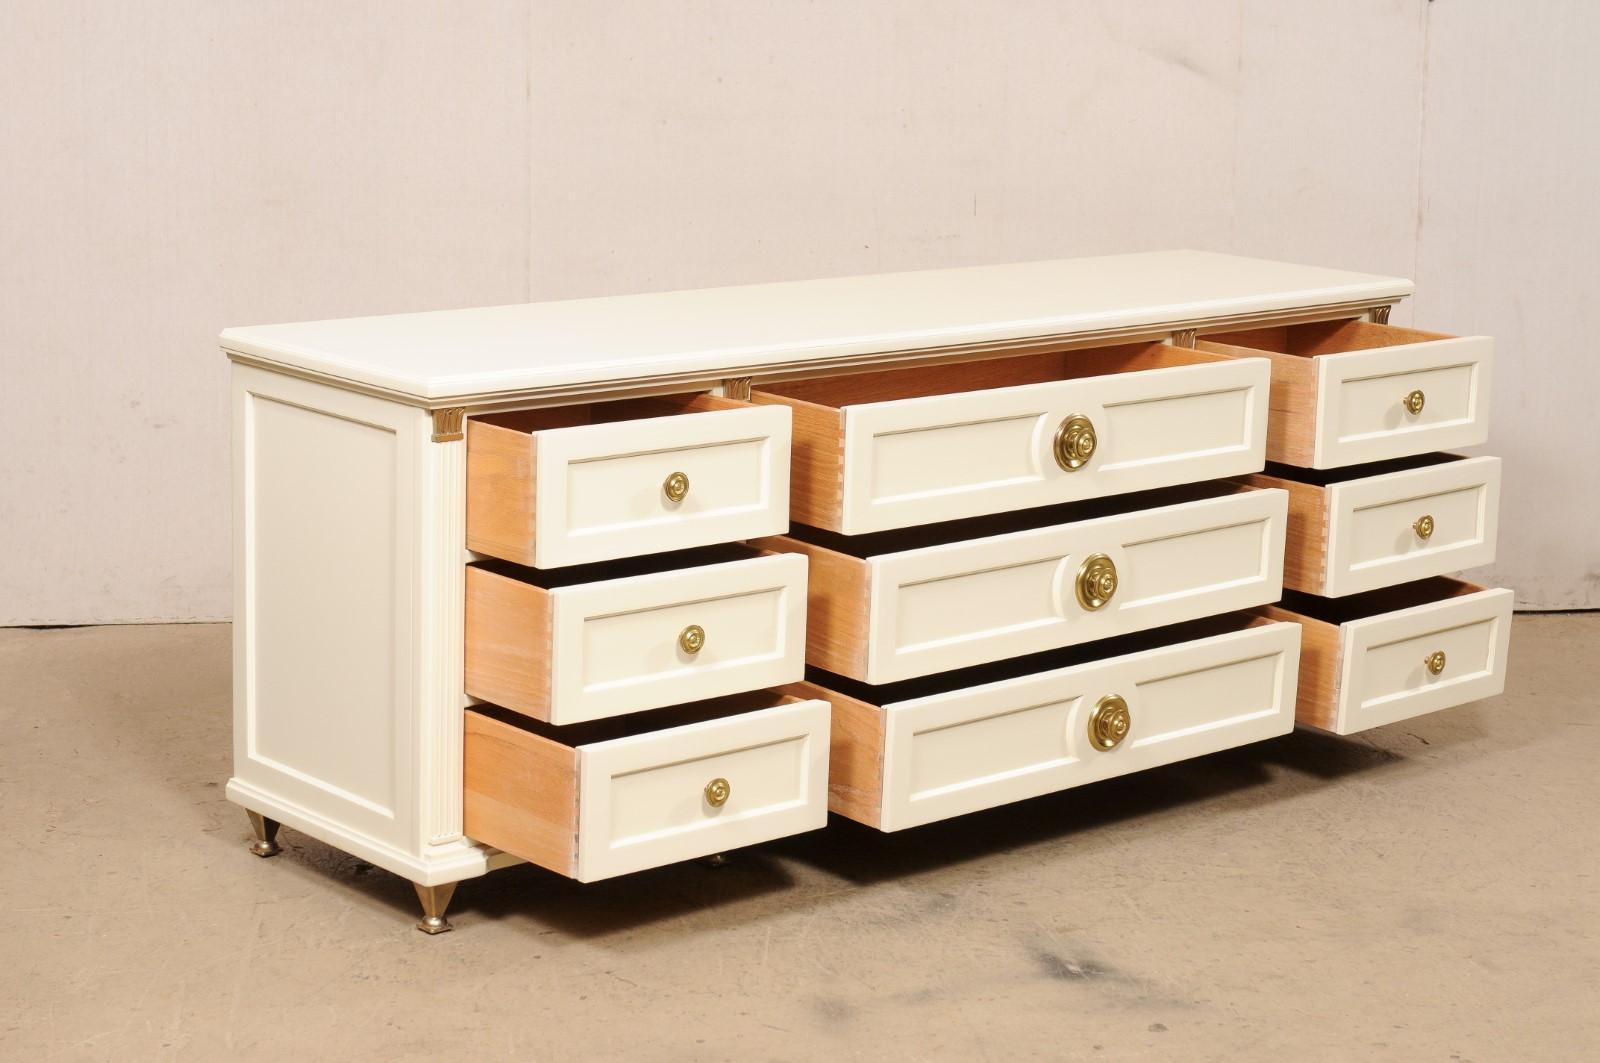 20th Century Martinsville 7 Ft Long Chest of Drawers, Ivory with Gold Hardware & Accents For Sale